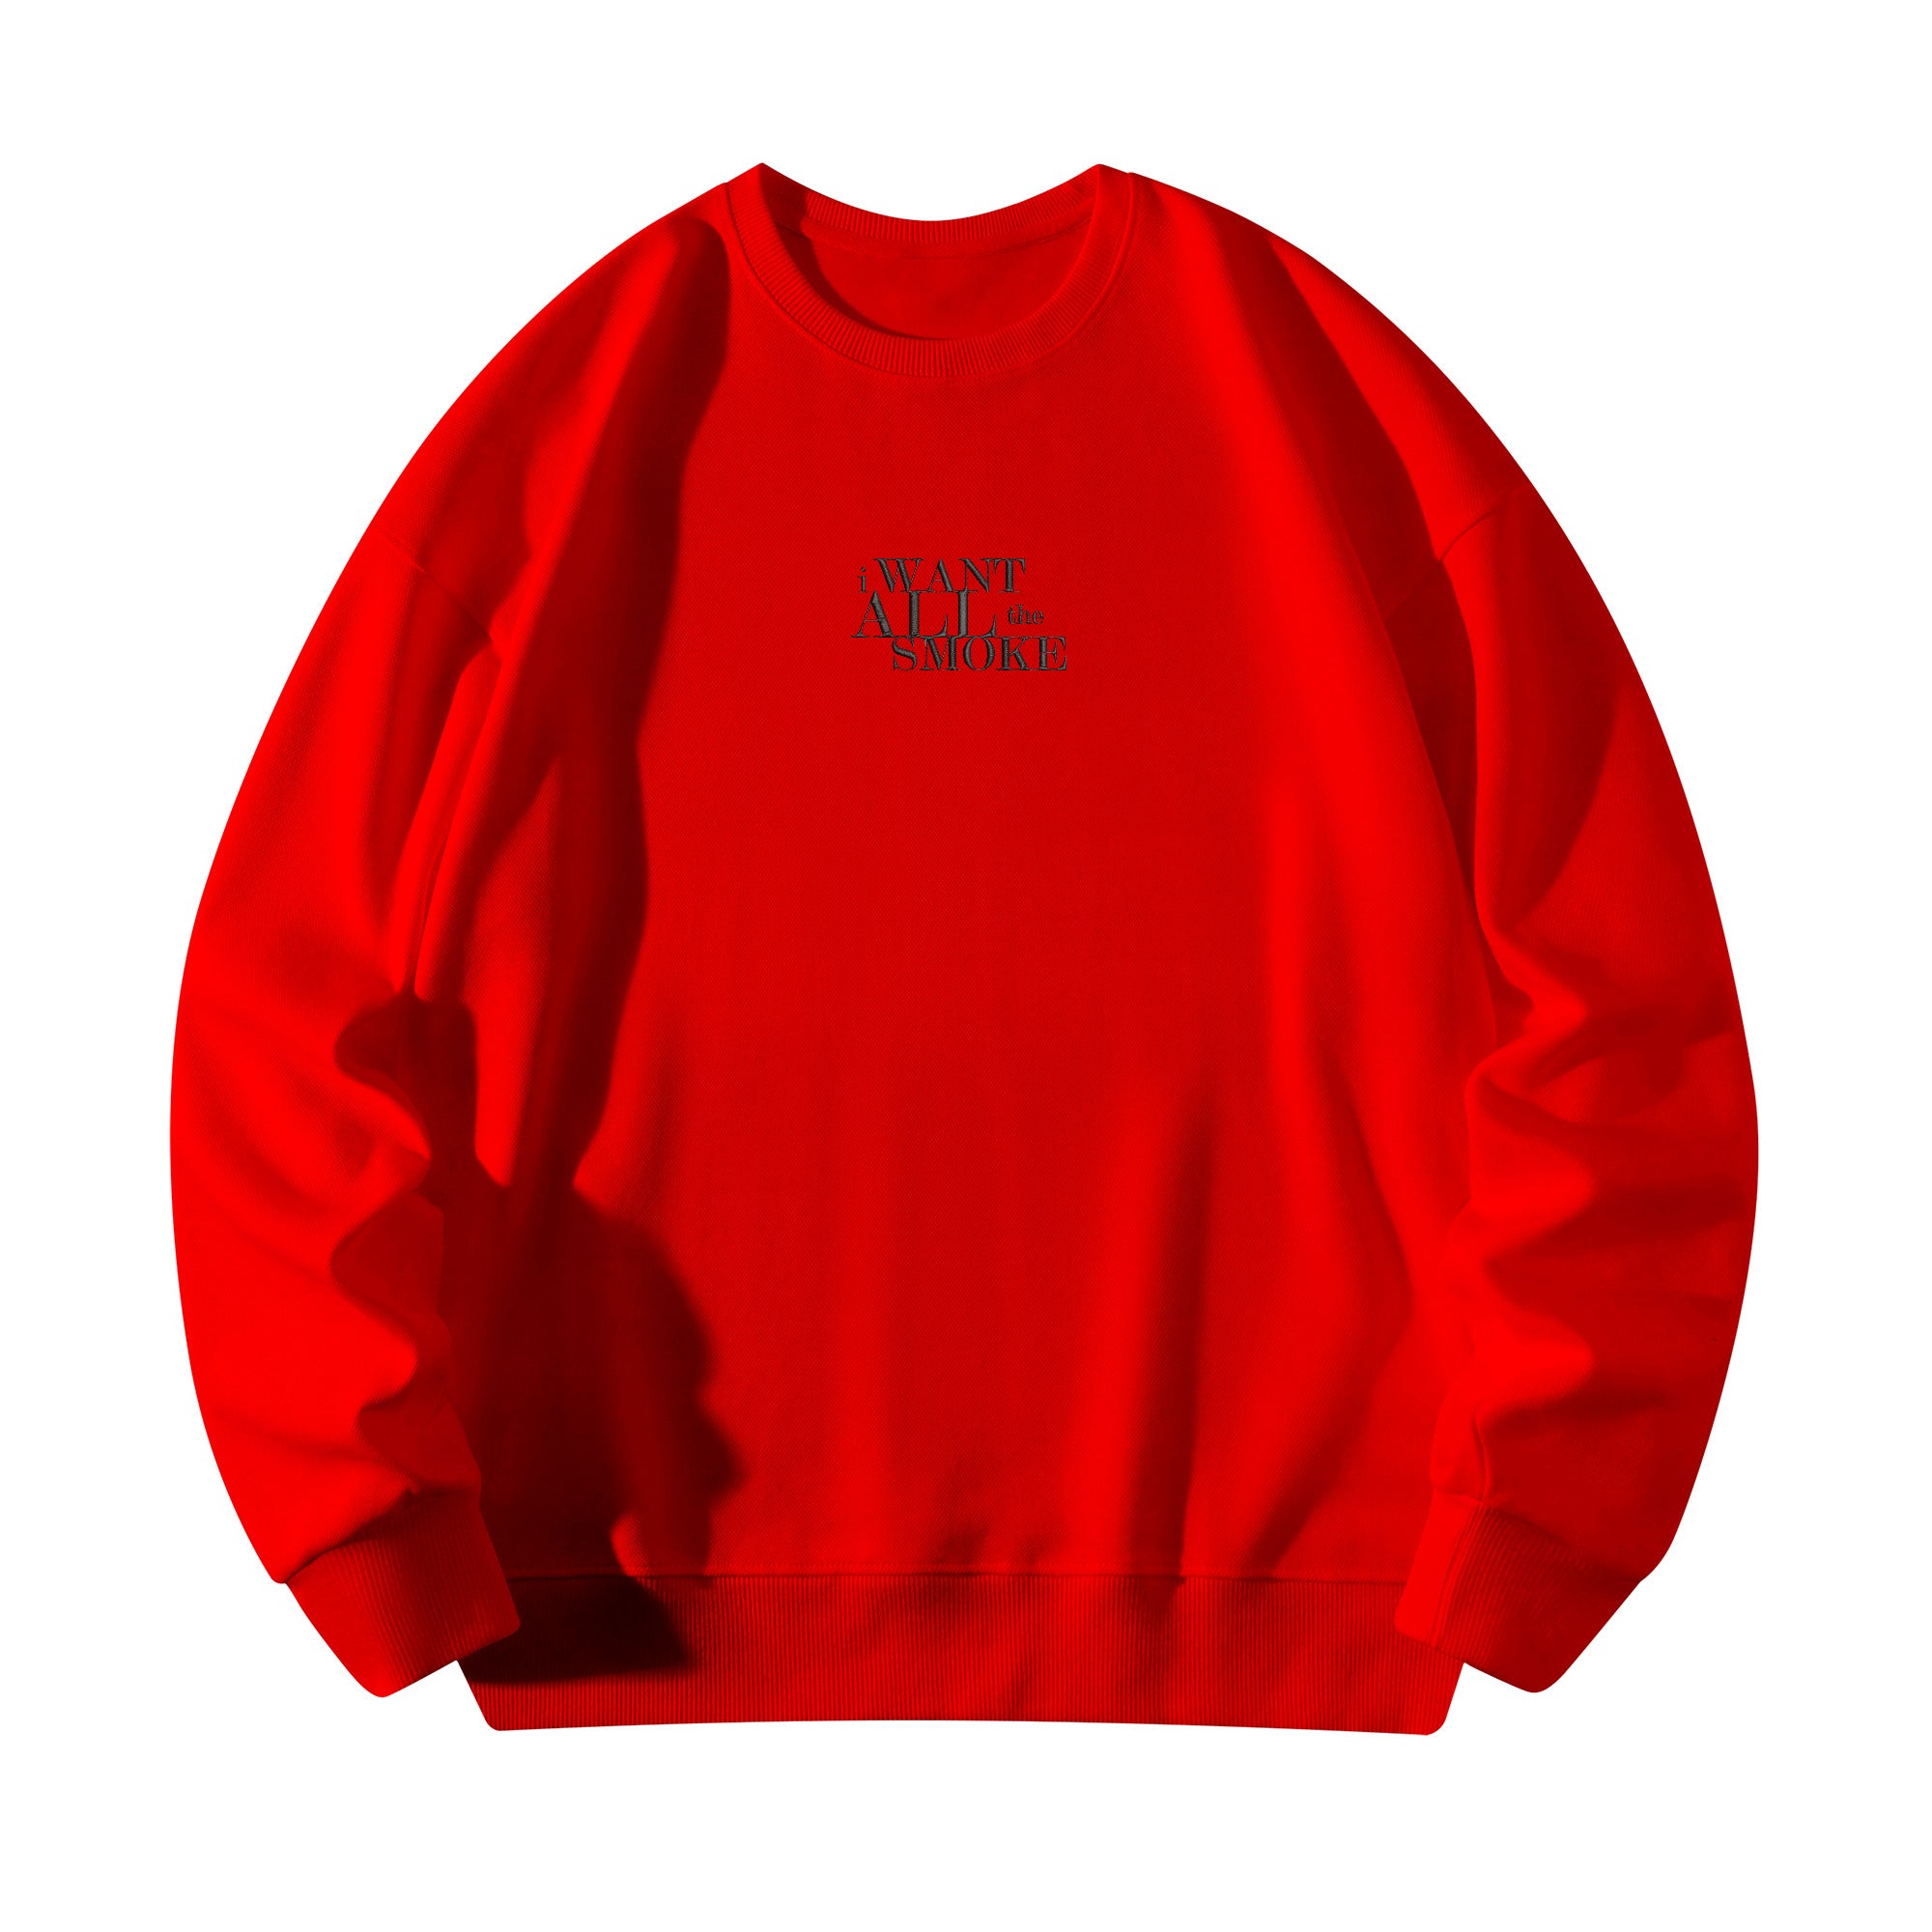 I Want All The Smoke Adult Embroidered Pullover Sweater